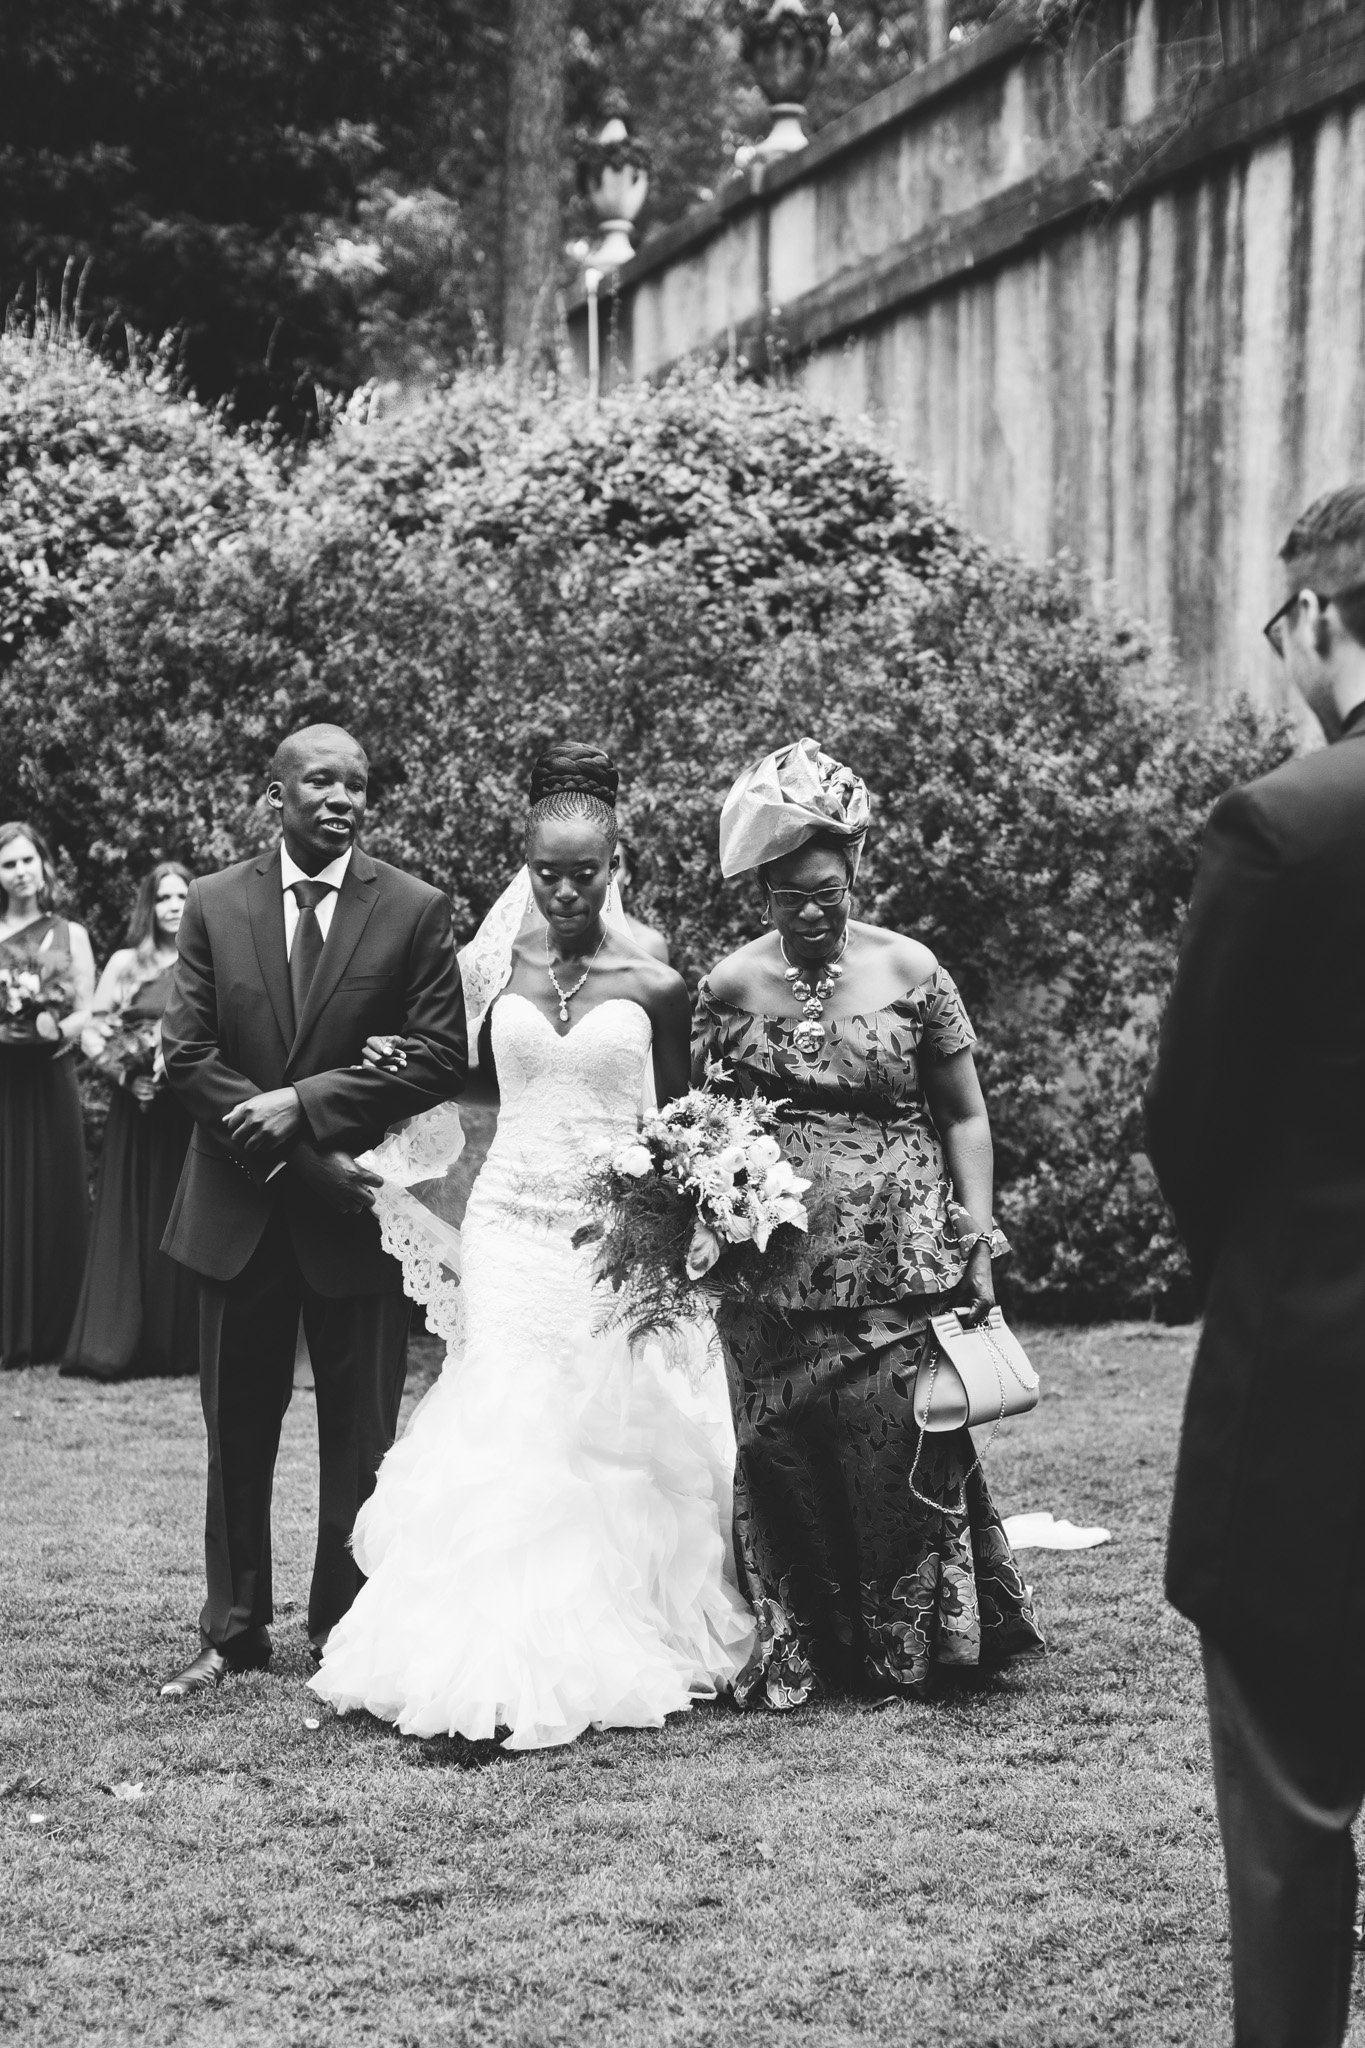 An emotional bride led by her mother and brother approaches her groom. Real wedding moment captured by Rebecca Cerasani